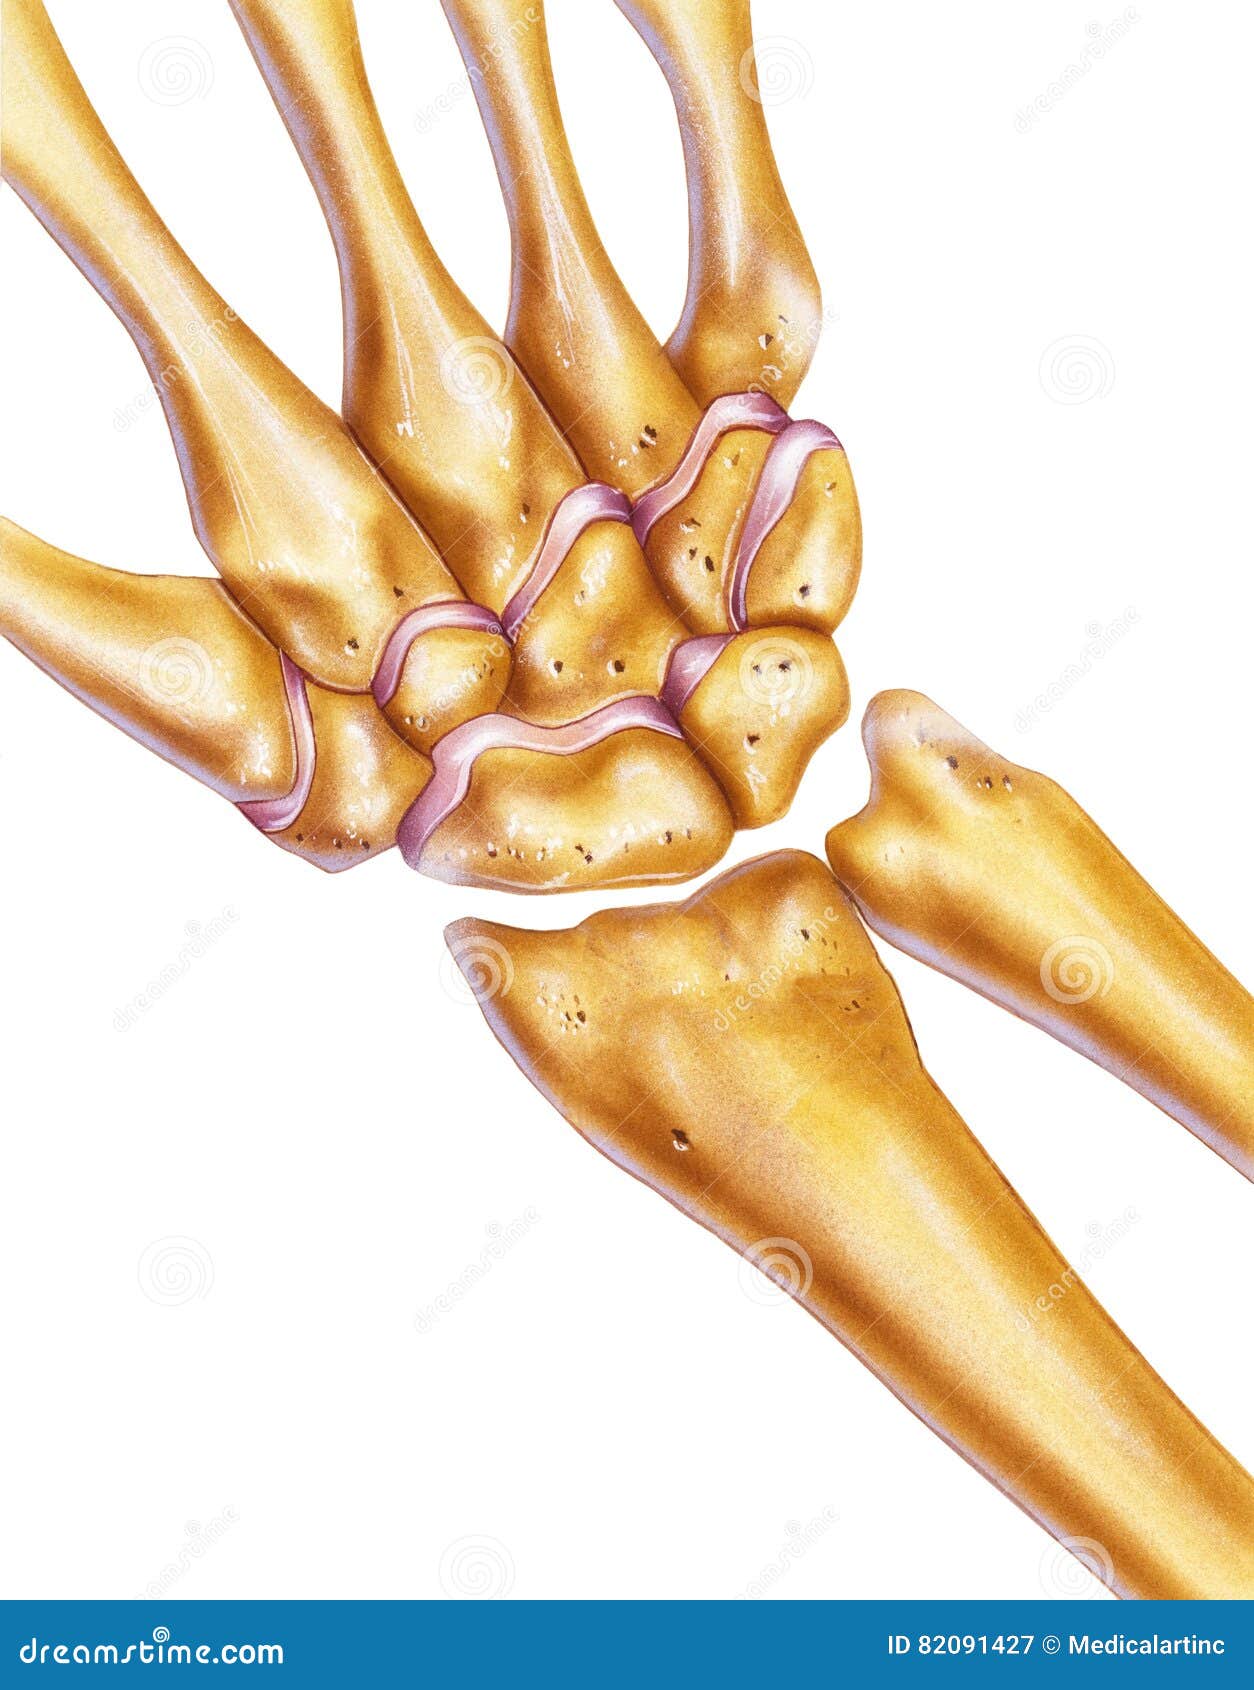 hand and wrist - bones & joints